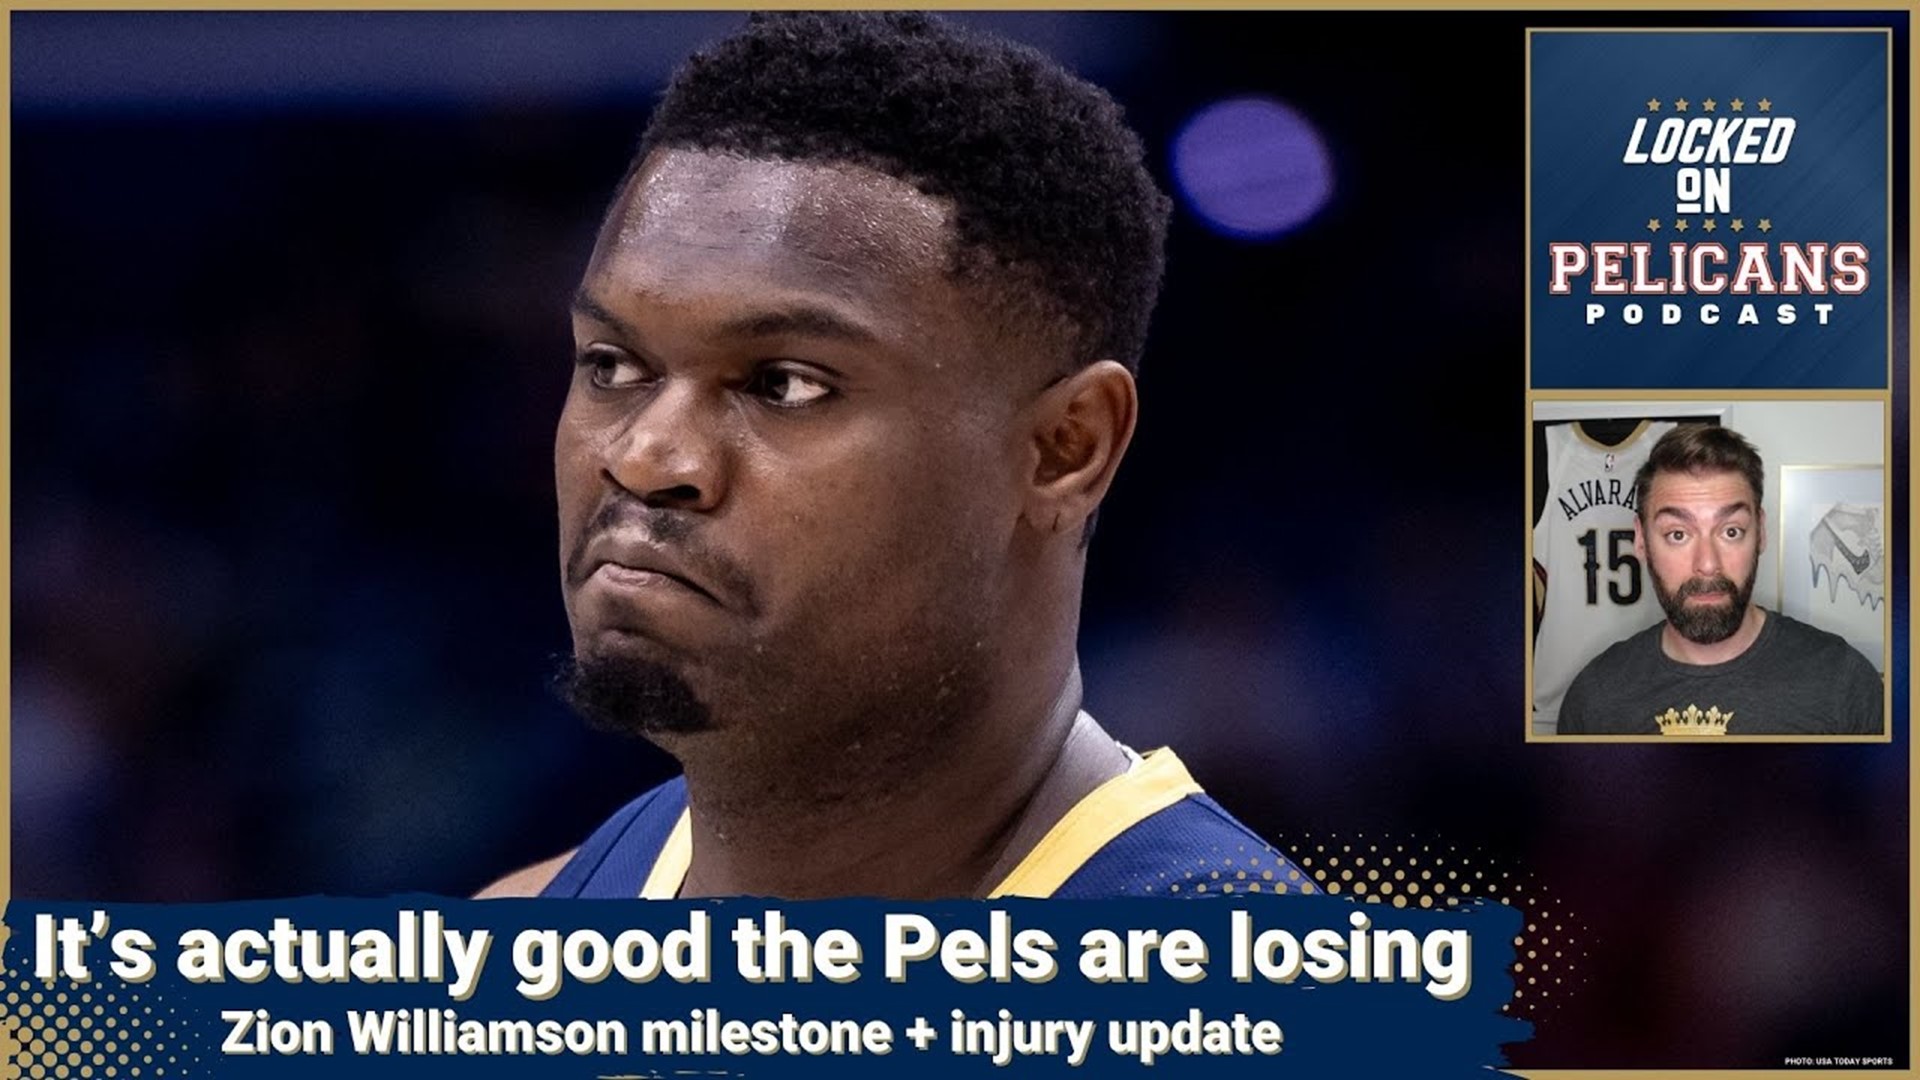 It's frustrating that Zion Williamson and the New Orleans Pelicans are losing but Jake Madison actually thinks it is a good thing for the long-term.